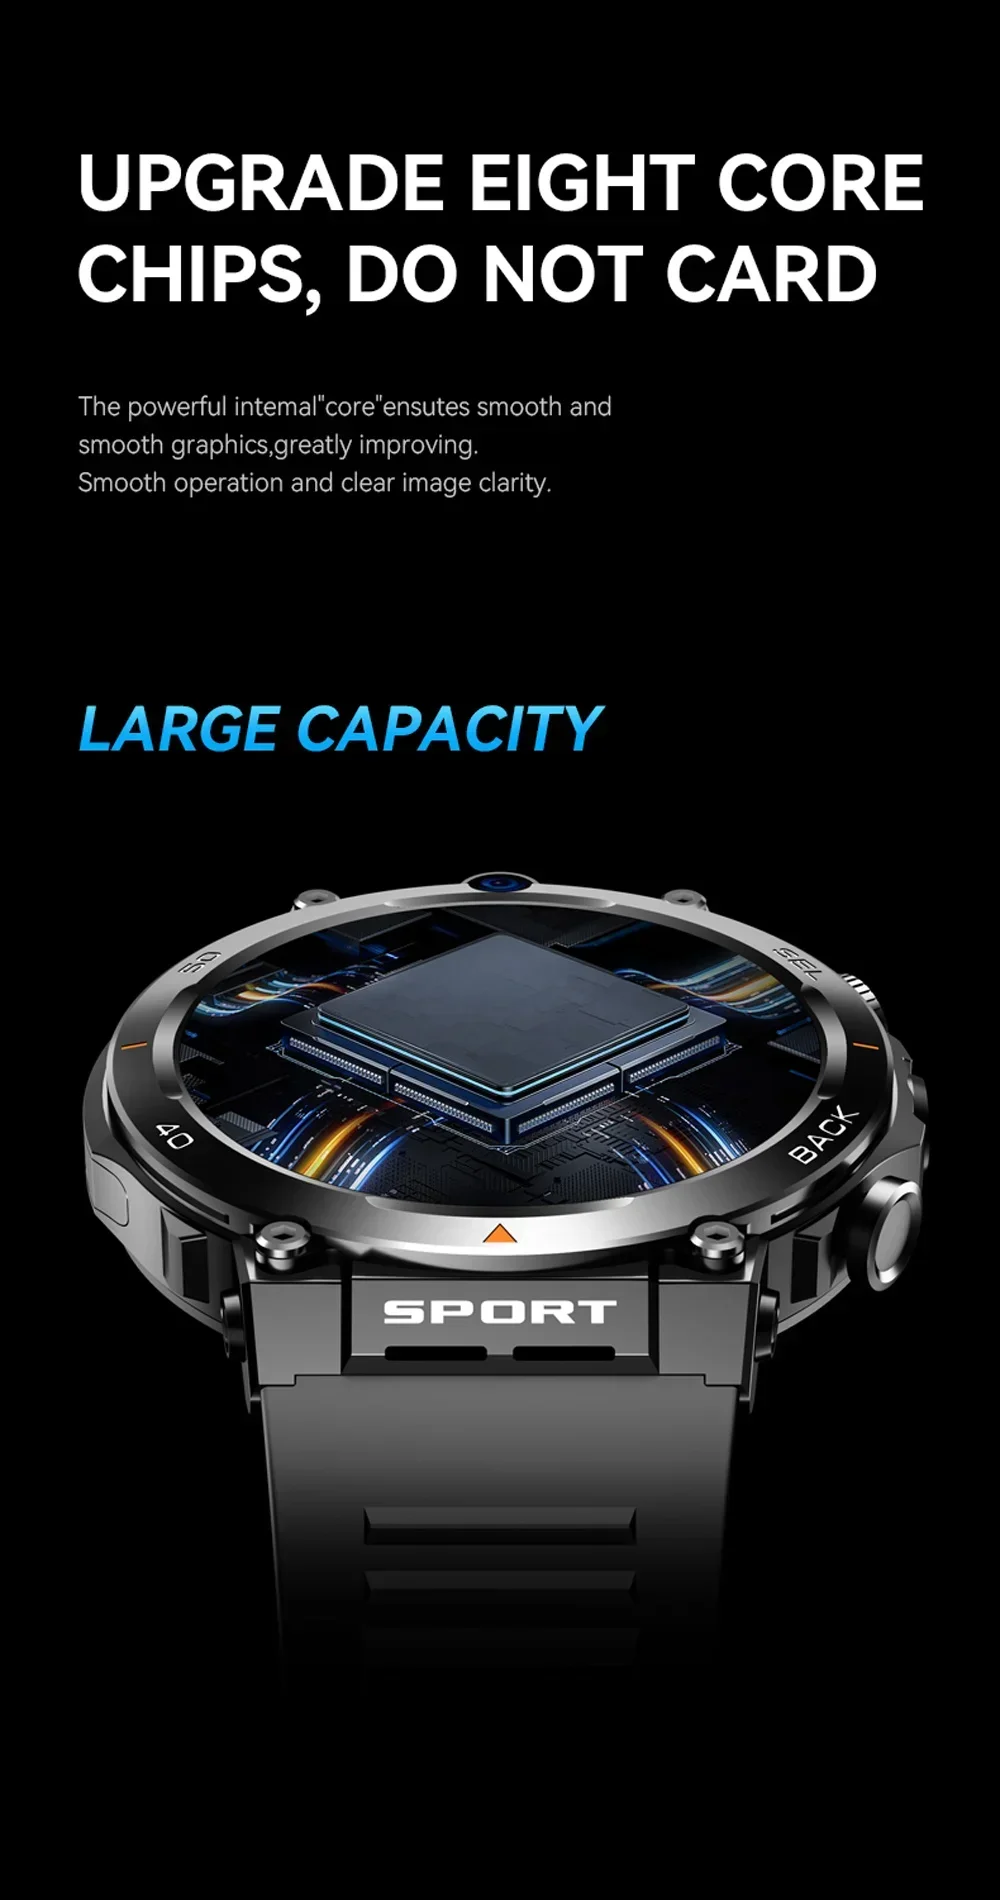 4G LTE Smartwatch For Men GPS HD Dual Camera SIM Talk NFC Heart Rate Health Monitoring Face Unlock Smart Watch For Android IOS